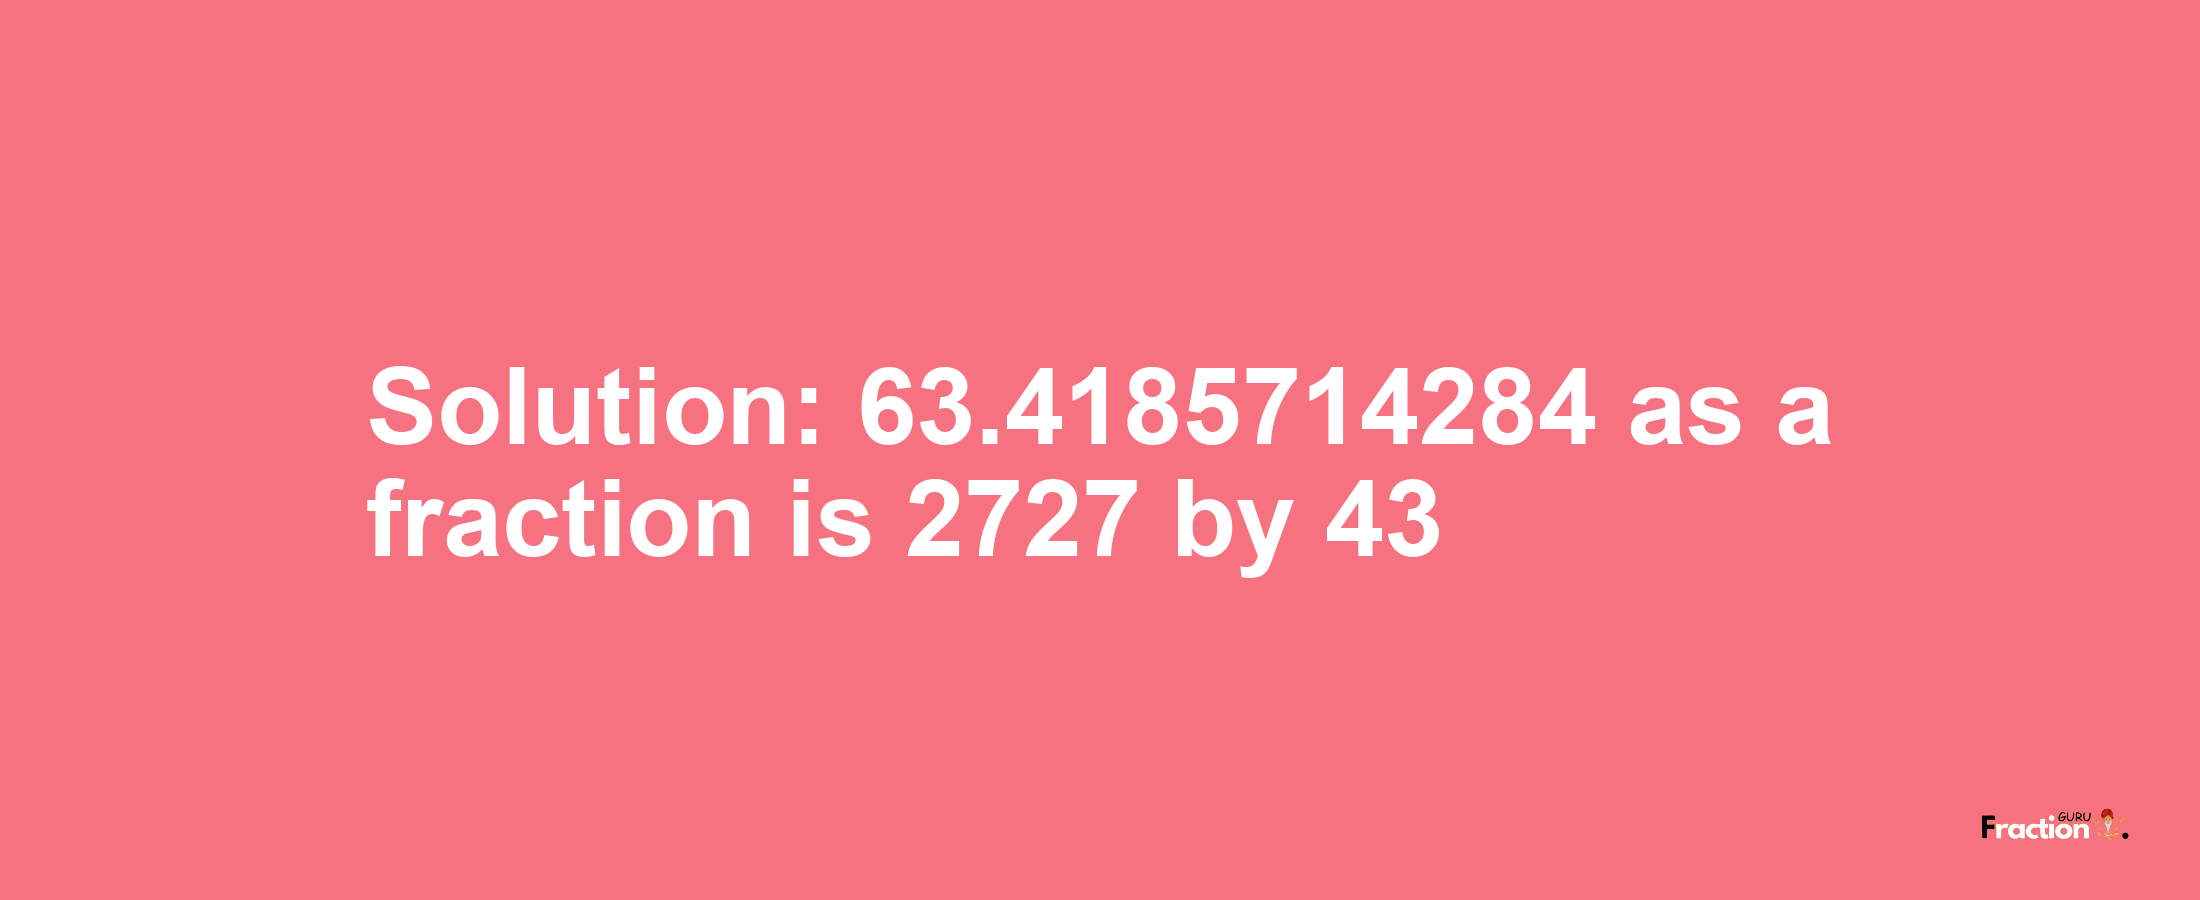 Solution:63.4185714284 as a fraction is 2727/43